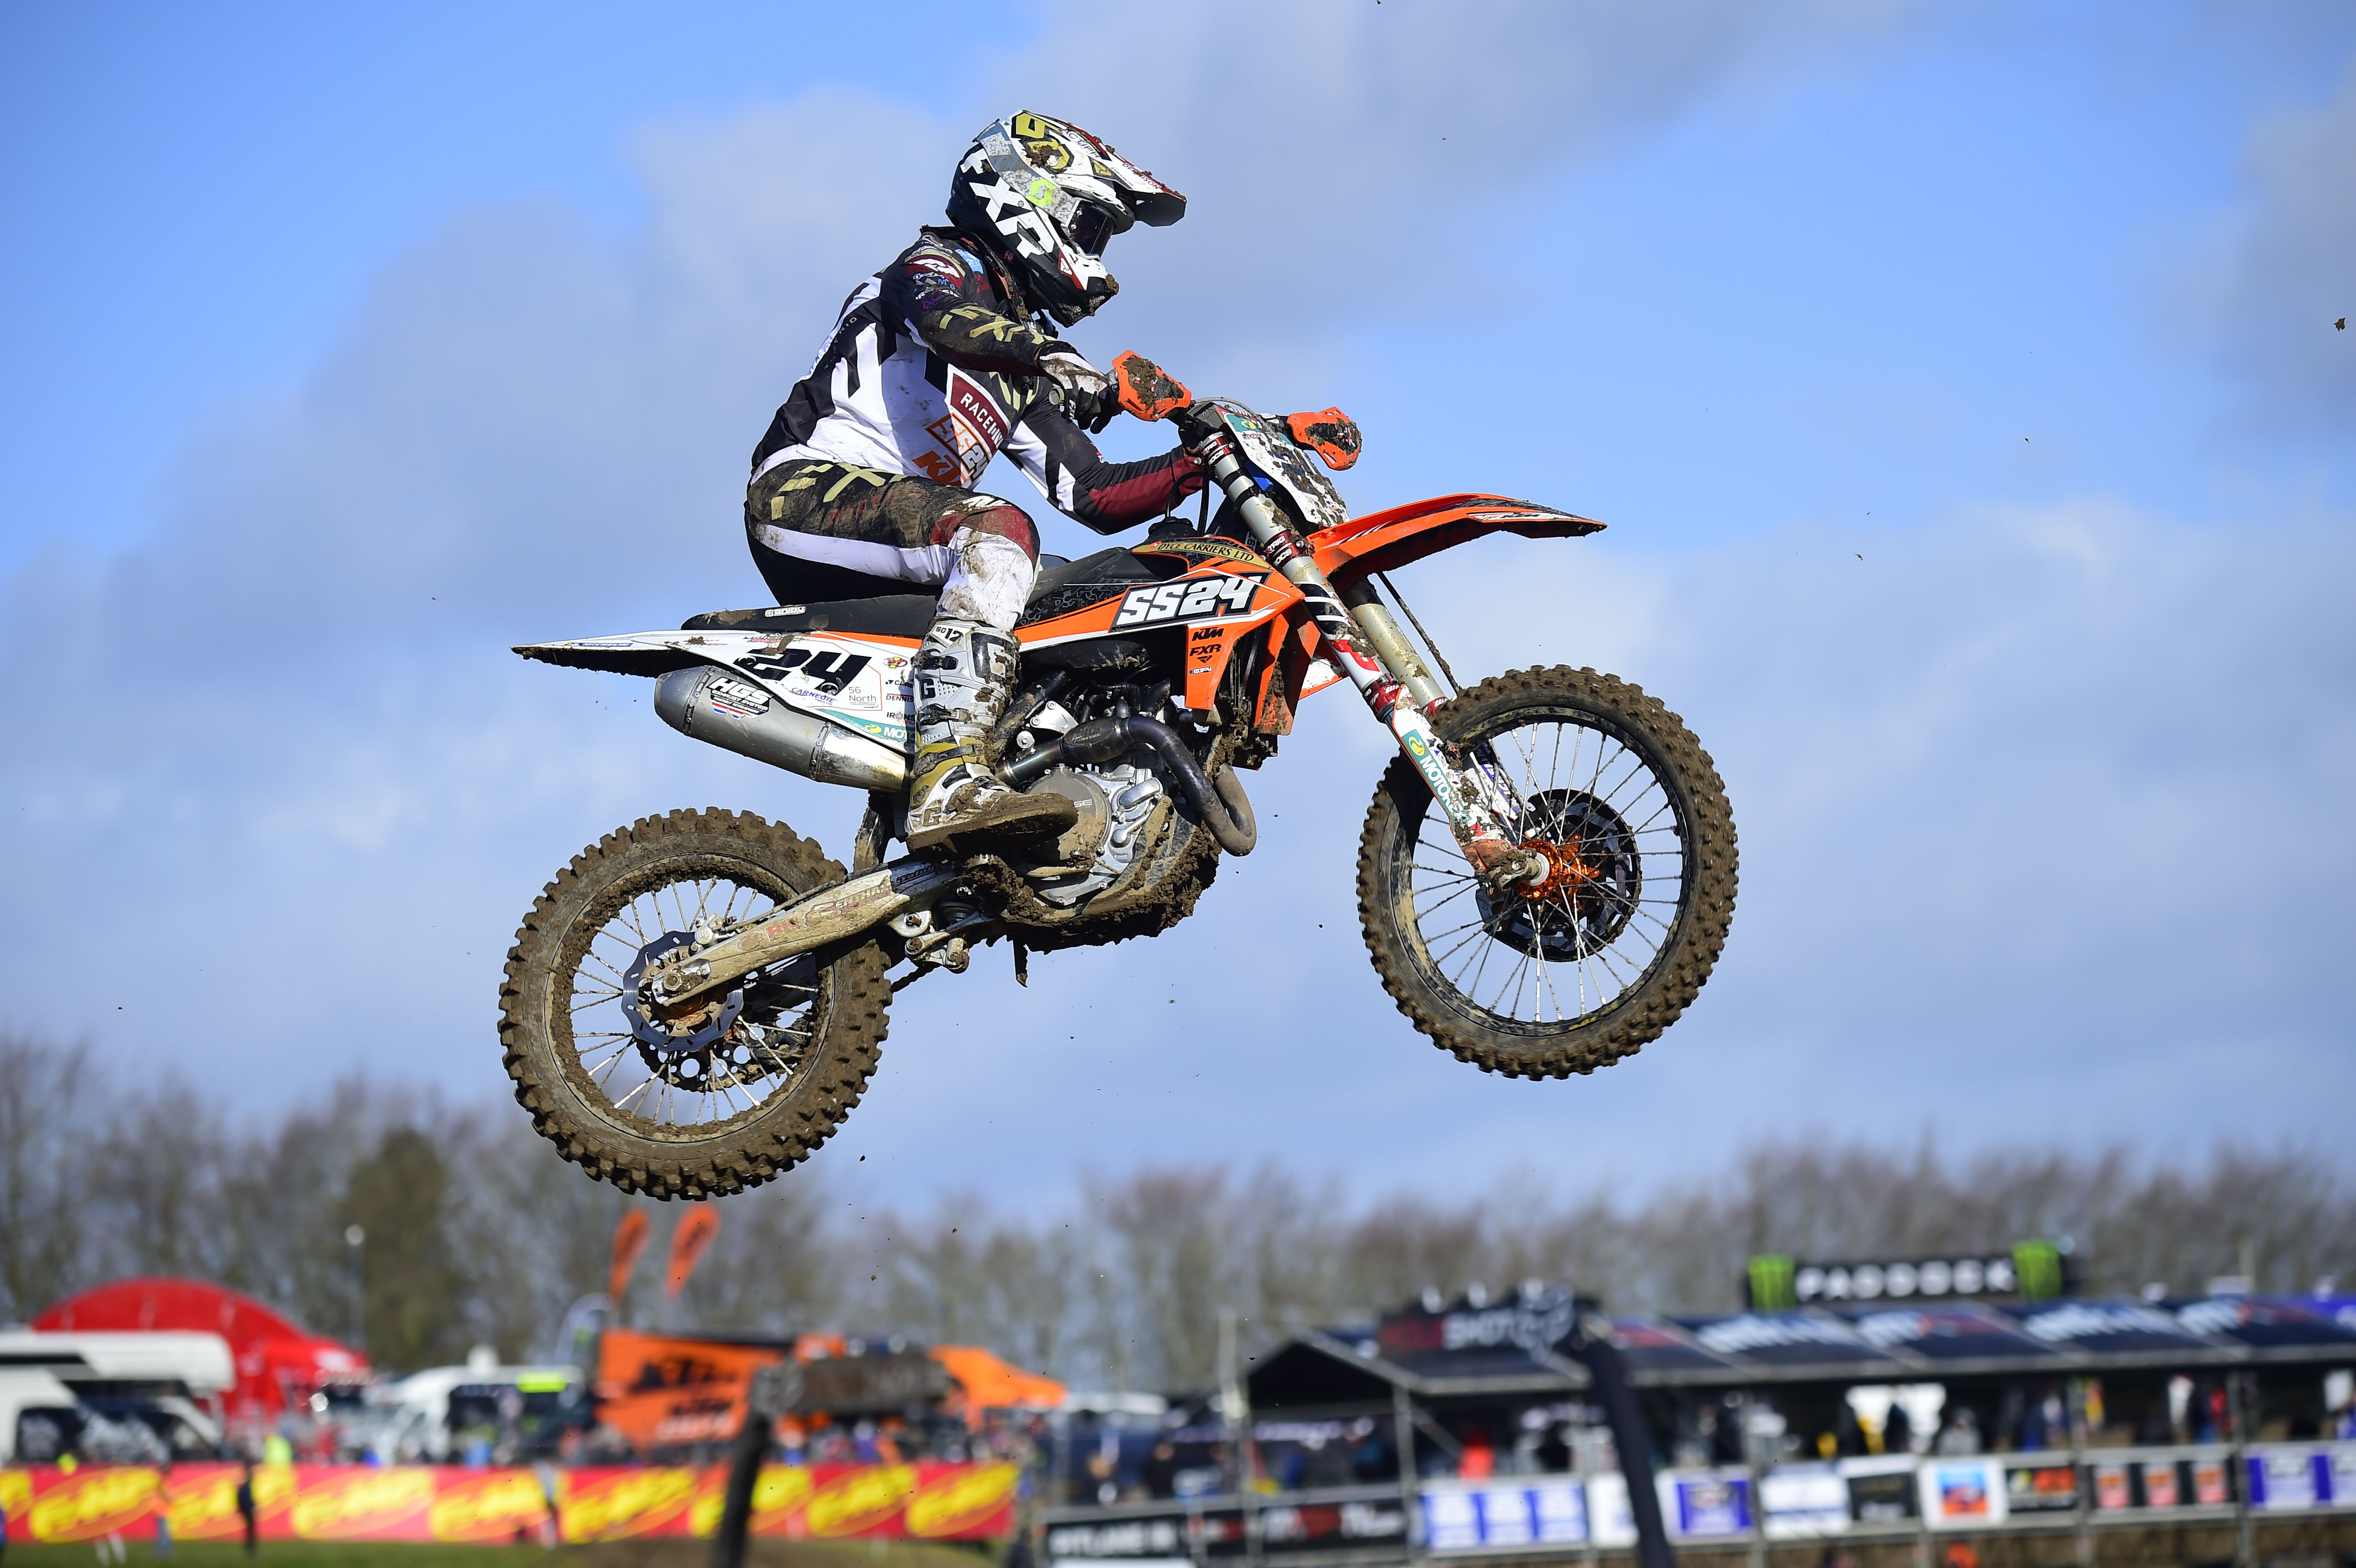 Production To Race Pace Setter Mxgp Work Continues For Ss24